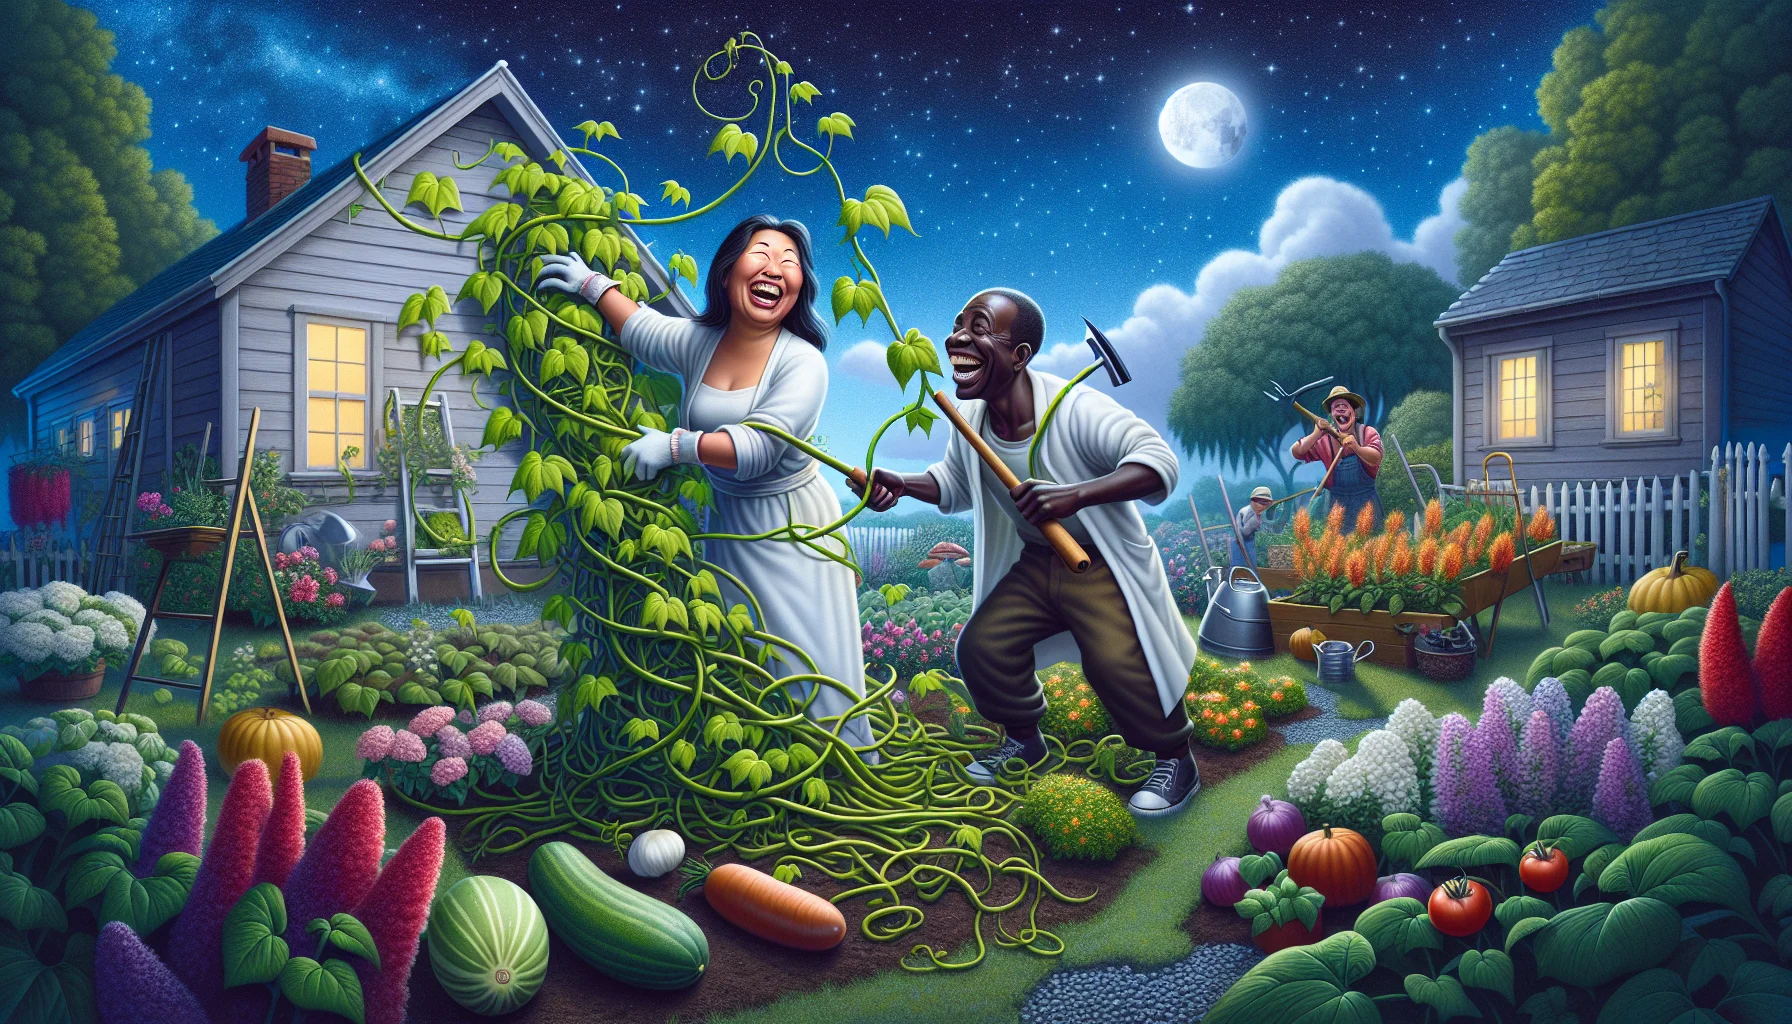 Create a photorealistic image of a humorous gardening scene under the enchanting May night sky. Illustrate an Asian woman and a Black man, both in the middle of a whimsical mishap with a rapidly growing vine that threatens to overrun their orderly garden. They should be laughing heartily, tools in hand, as they try to get the vine under control. Include various plants, blooming flowers and vegetables all around them in vibrant colors. The garden should be bathed in the soft, silvery light of the moon and the twinkle of stars in the indigo night sky.